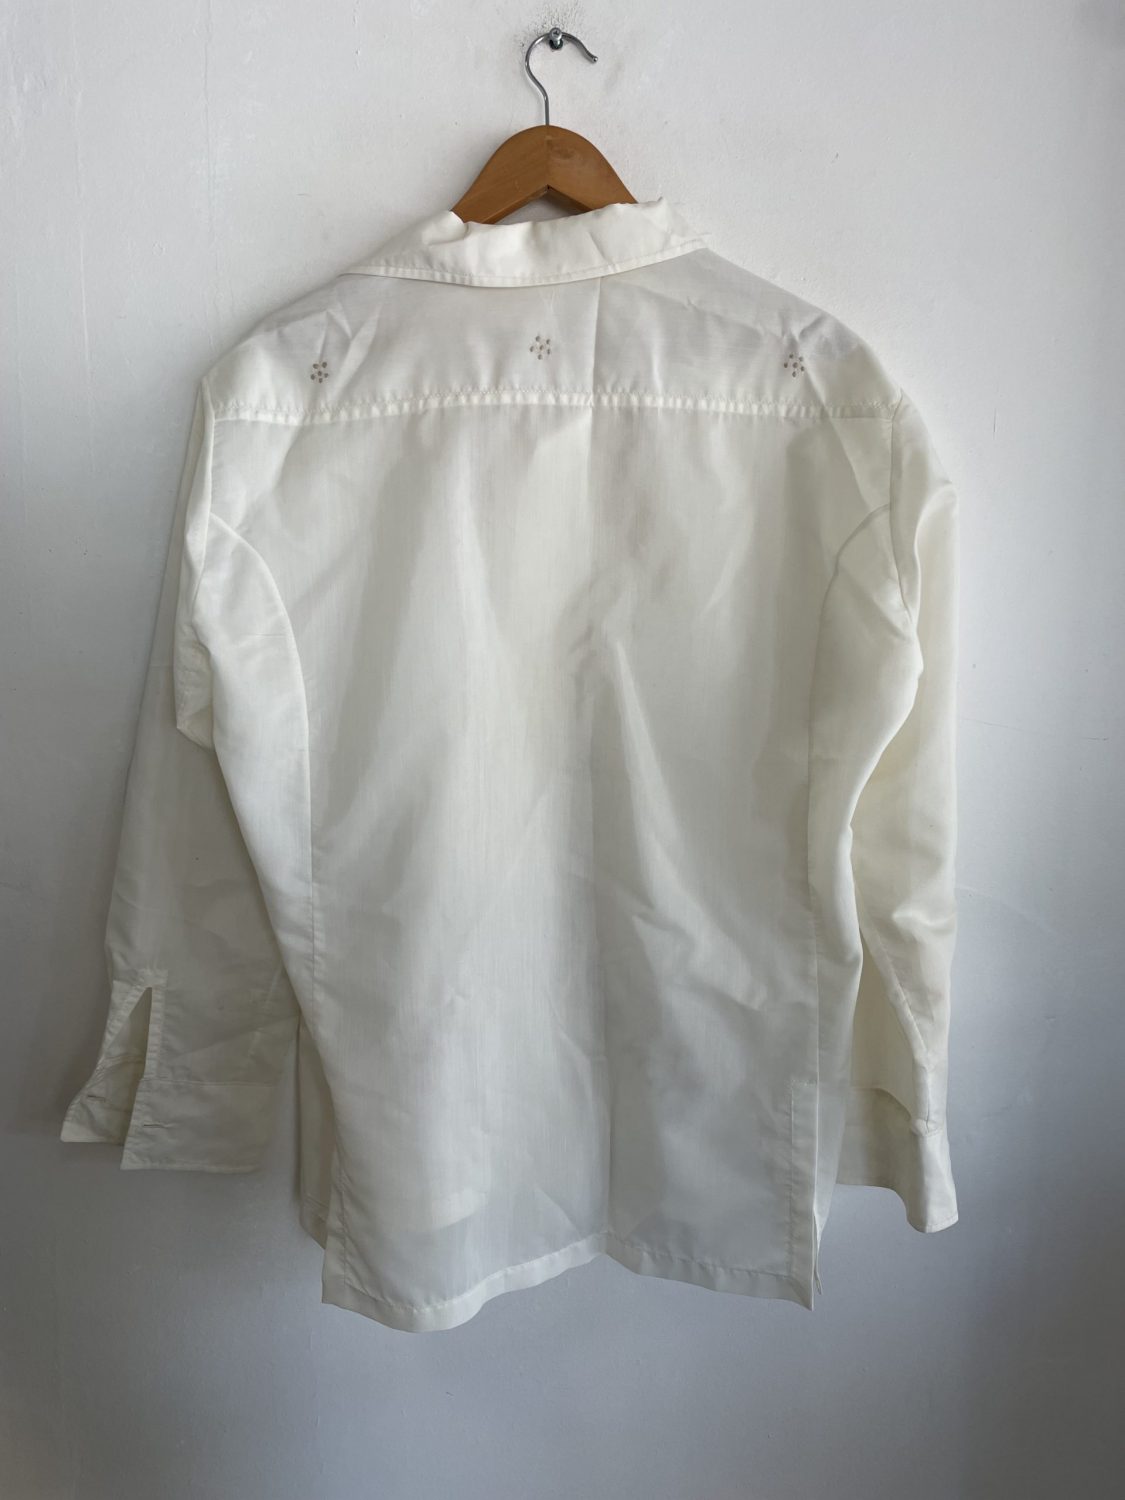 BEAUTIFUL AUTHENTIC MENS 1970s EMBROIDERED CREAM SHIRT | Chaos Bazaar ...